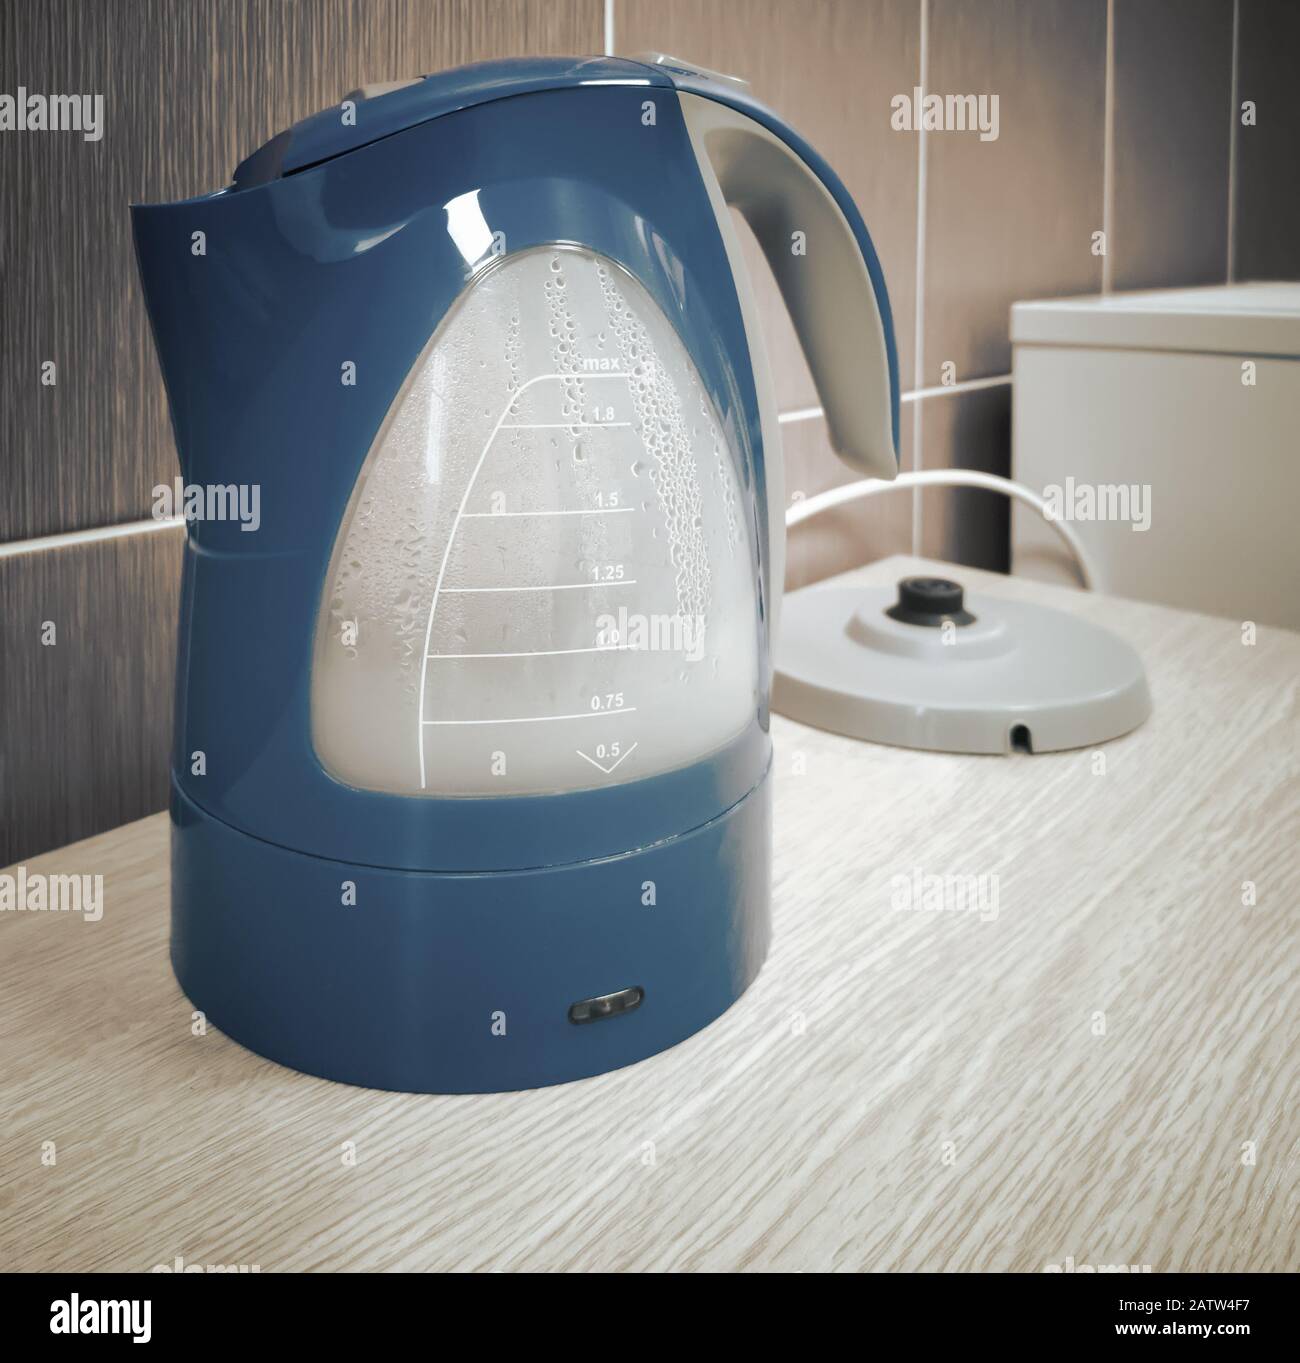 https://c8.alamy.com/comp/2ATW4F7/modern-electric-kettle-on-the-kitchen-table-2ATW4F7.jpg